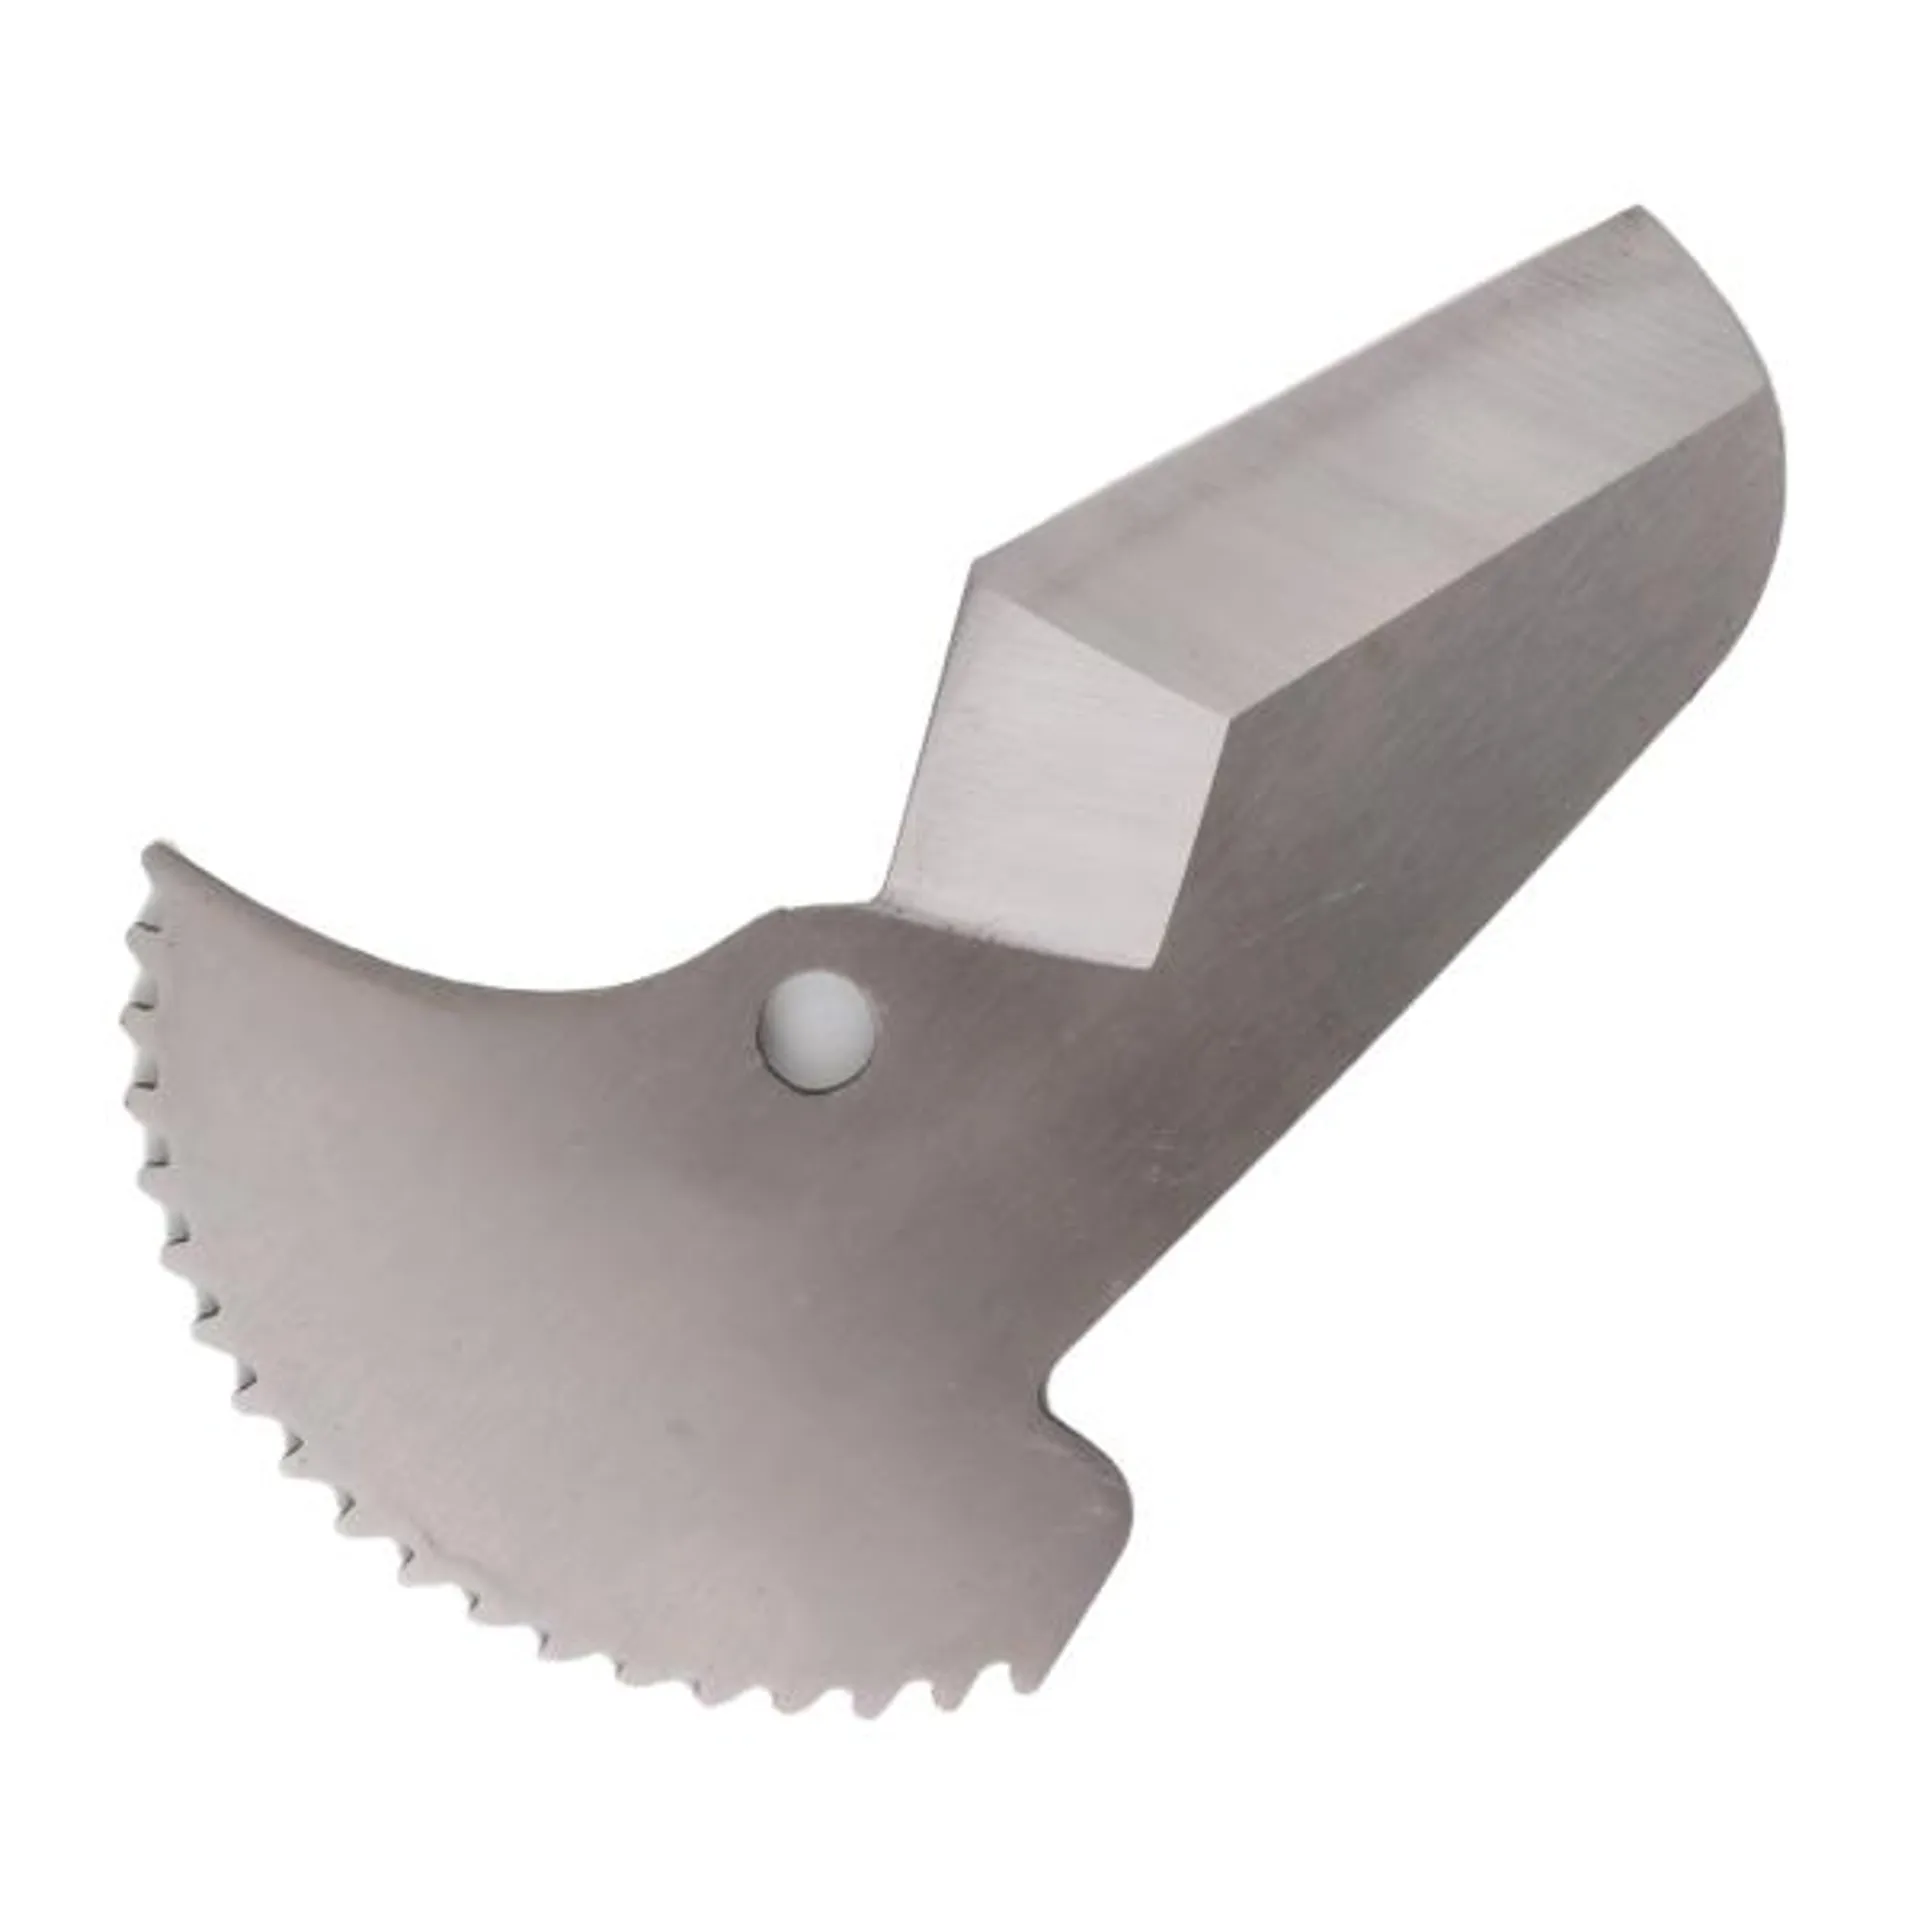 2.5" PVC Cutter Replacement Blades